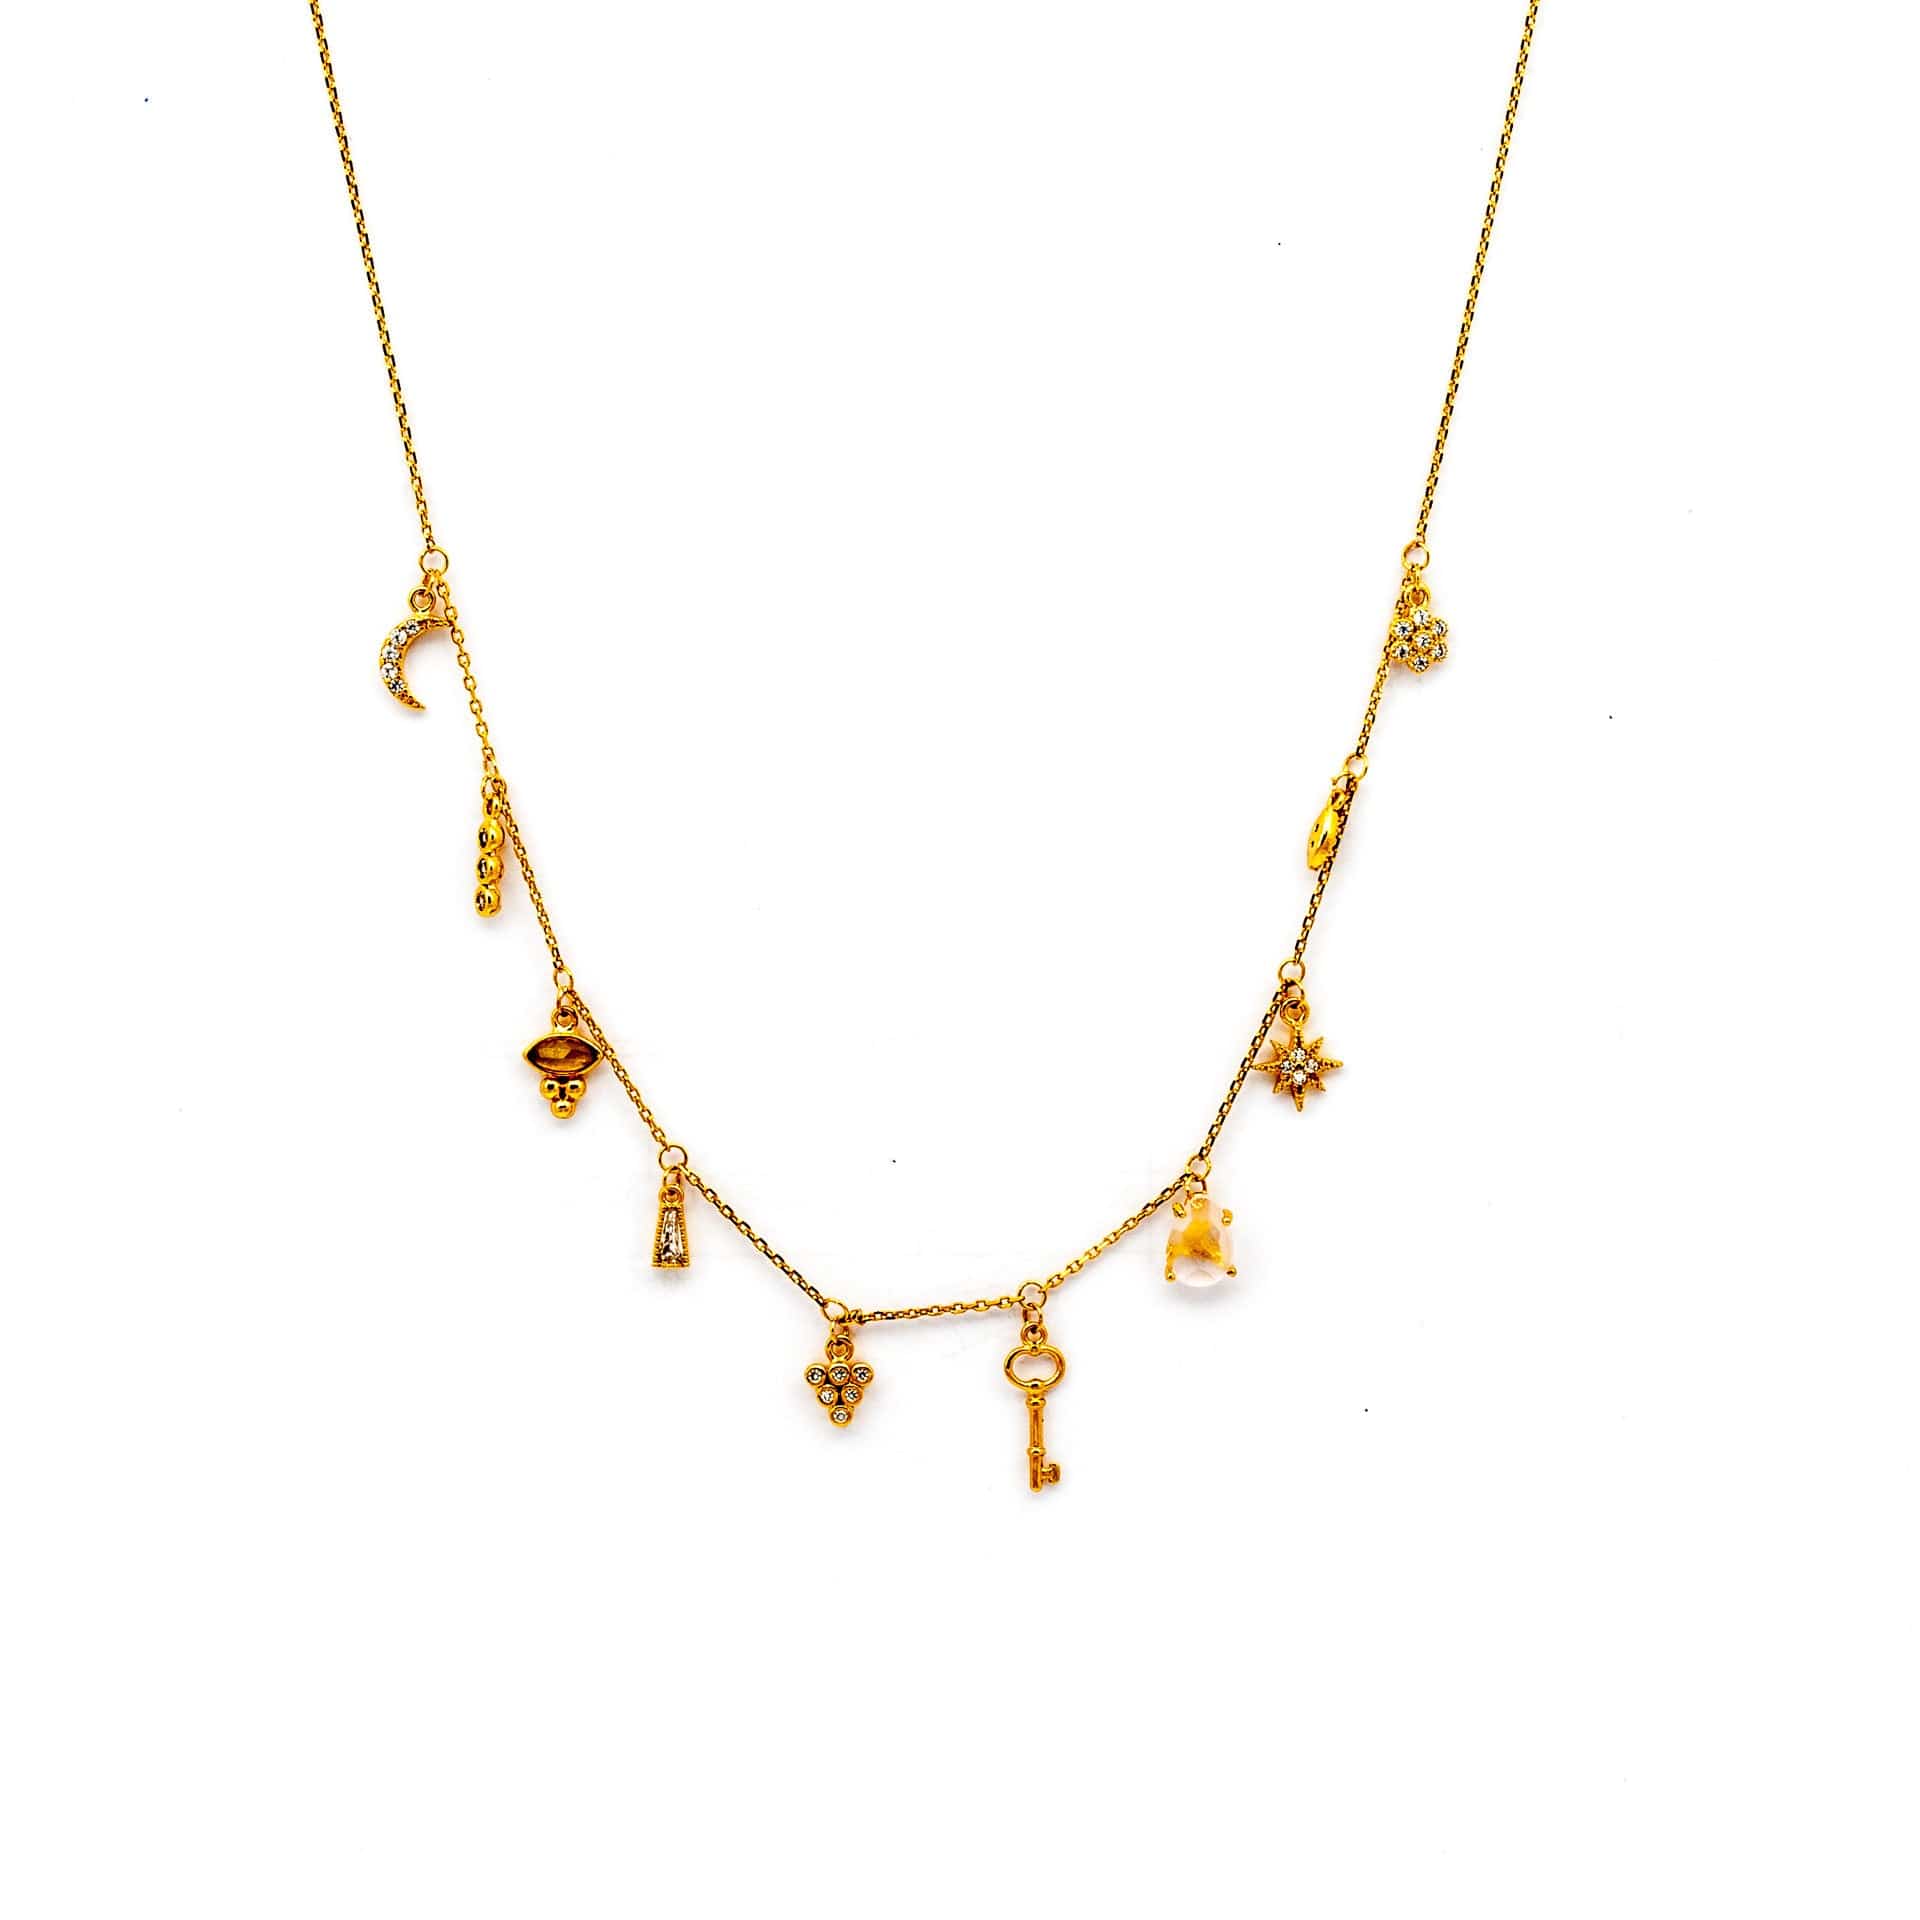 TAI JEWELRY Necklace Gold Necklace With Stationed Charms